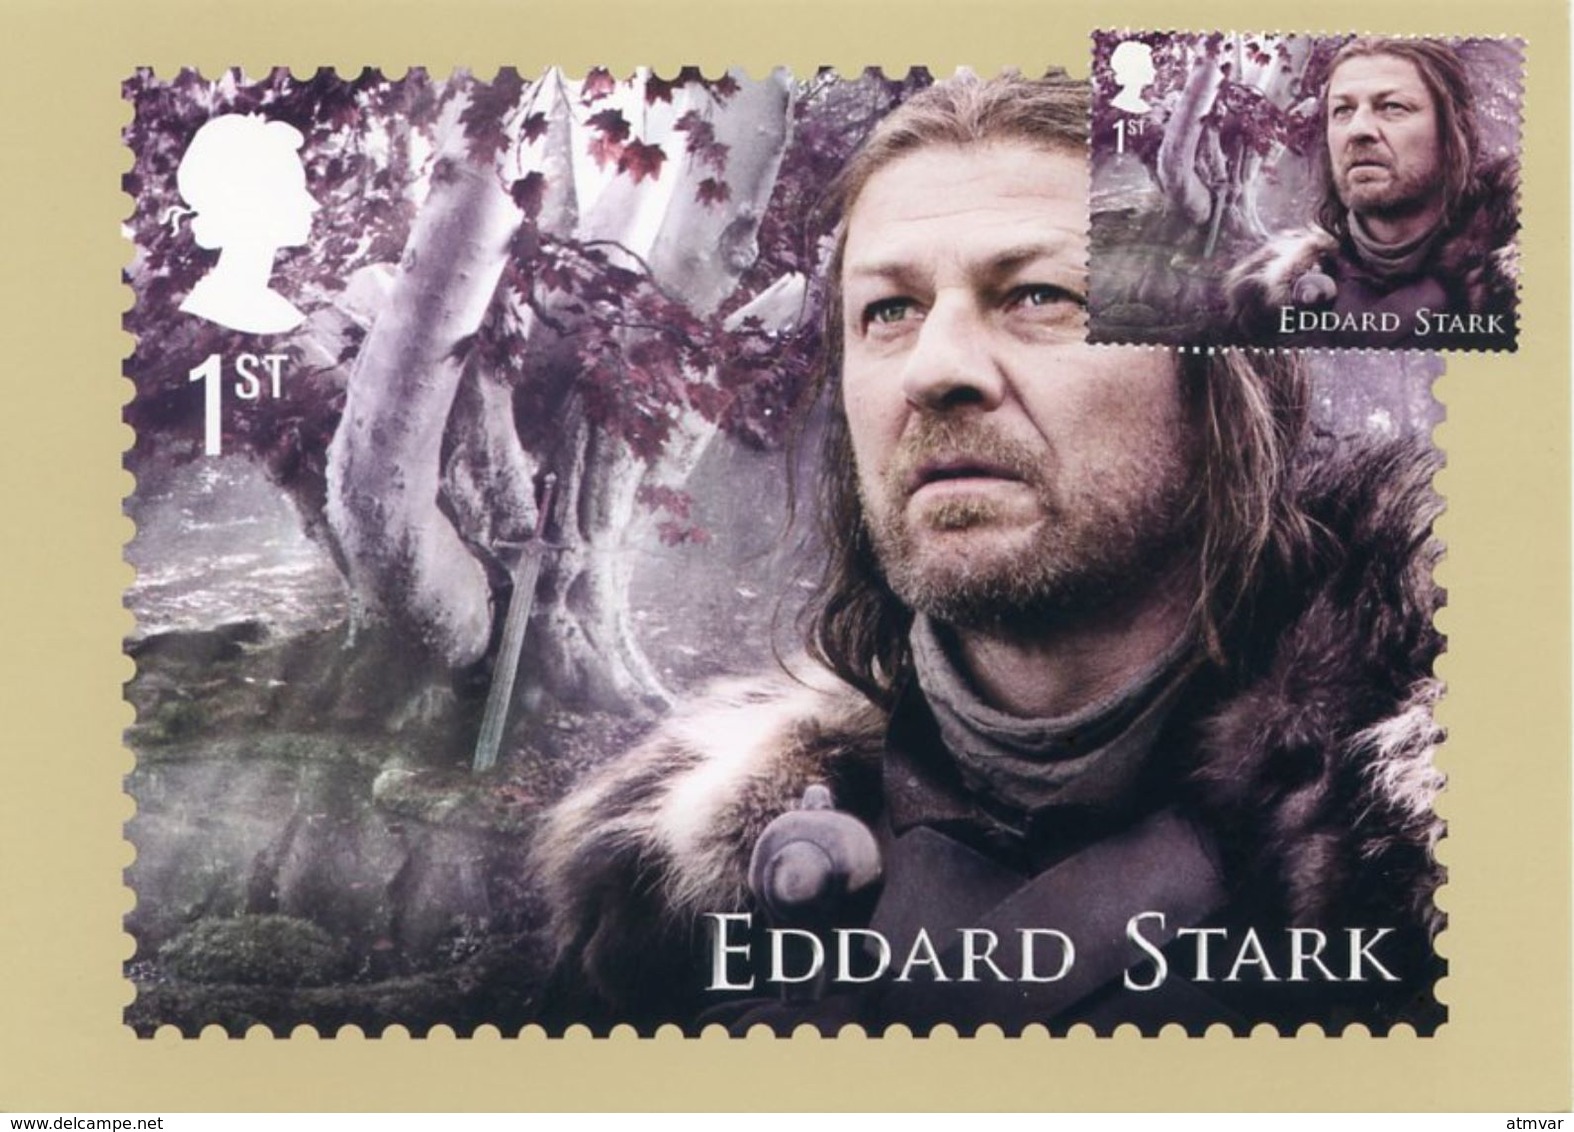 REINO UNIDO / UK (2018) - GAME OF THRONES Full set of postcards + stamps + Post&Go ATMs (see 32 scans) / Juego de Tronos